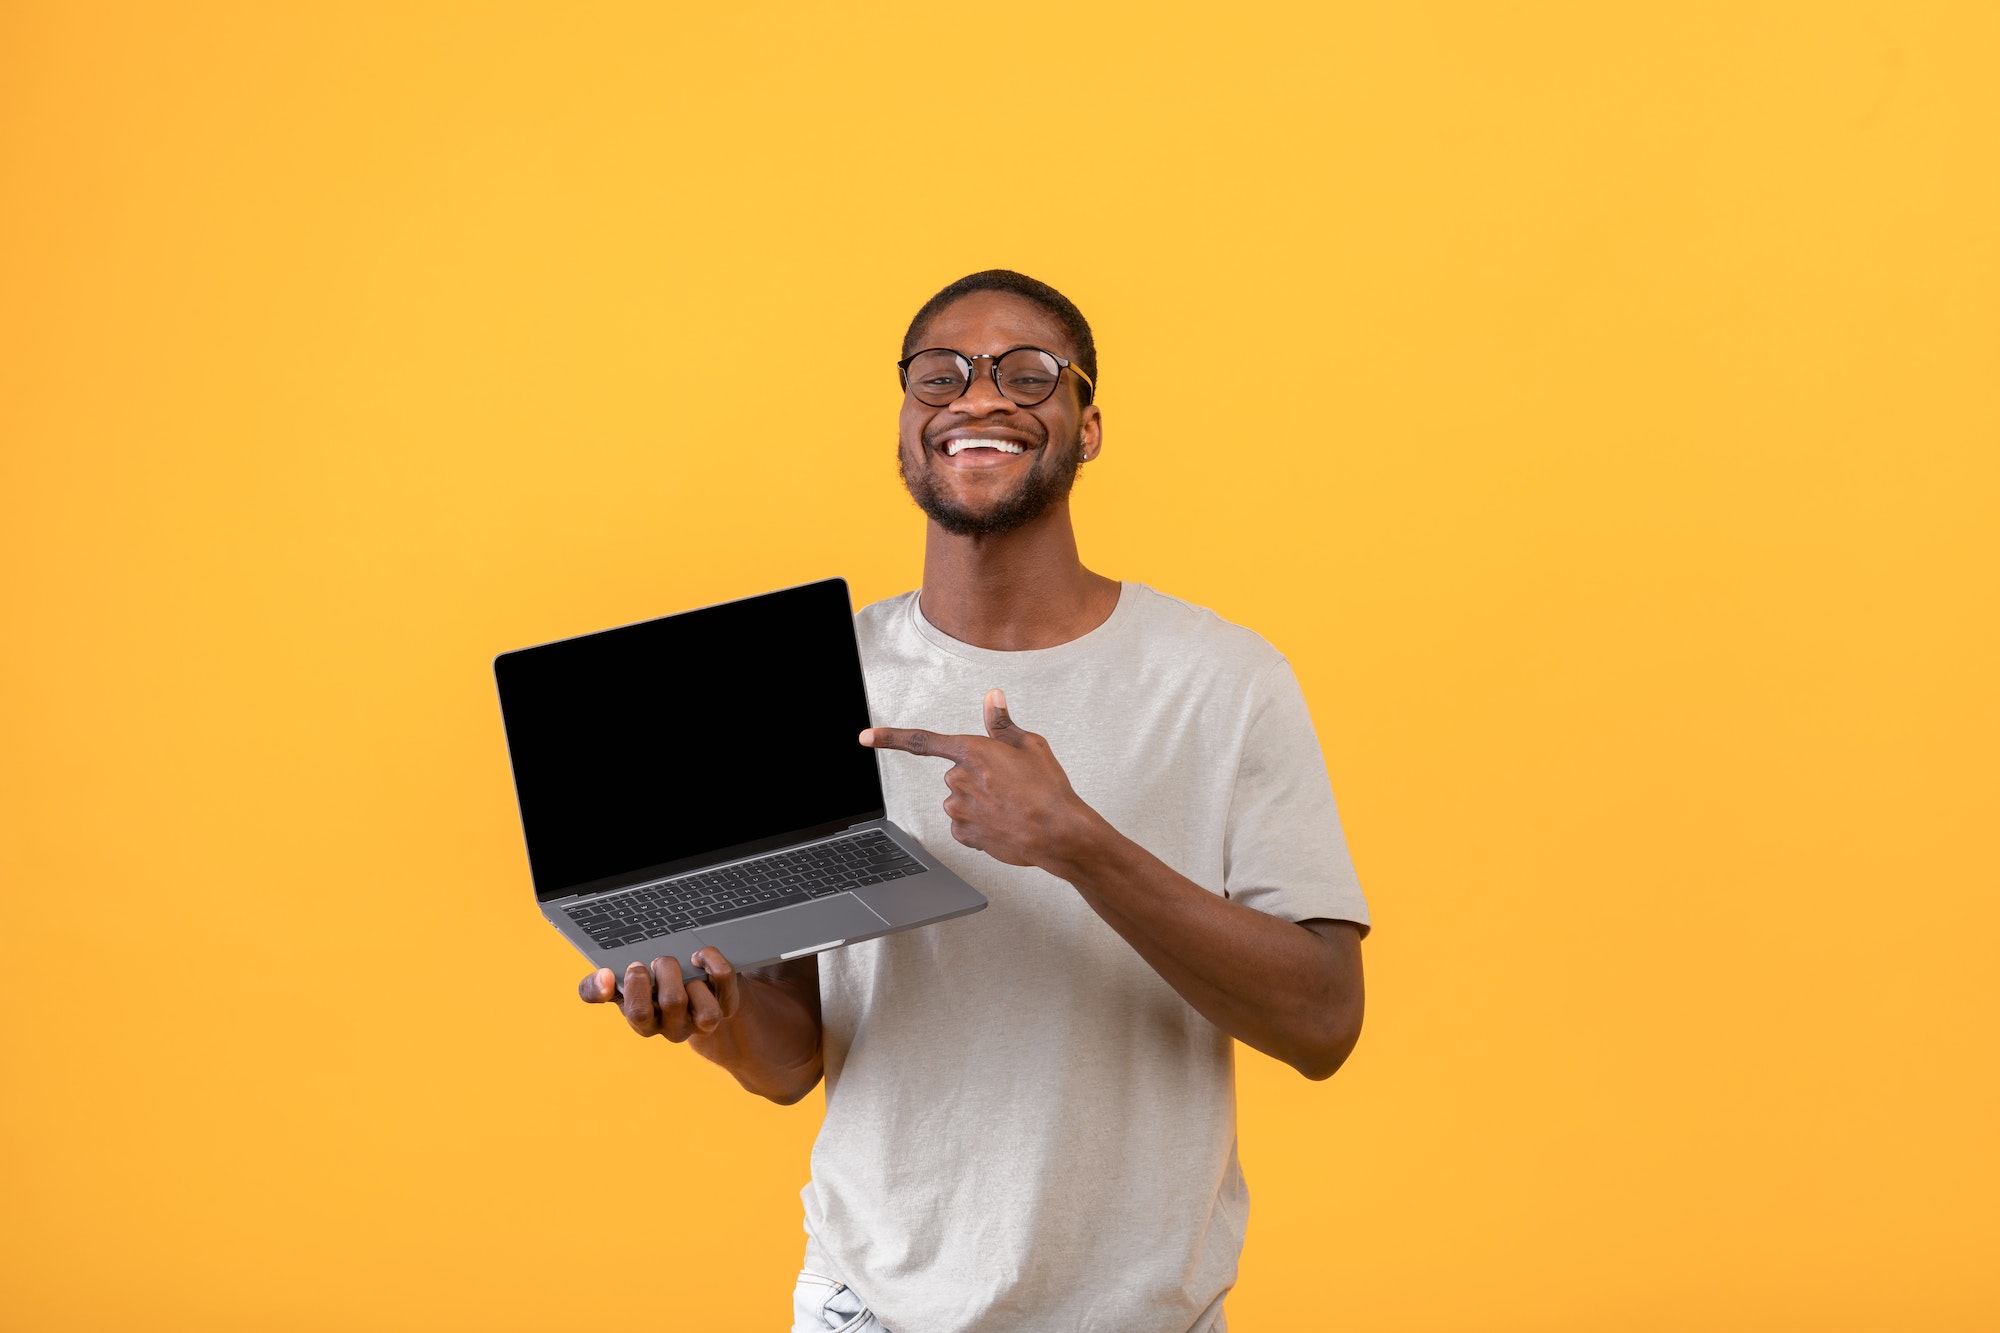 Joyful black man pointing at blank laptop screen with space for your website design over yellow